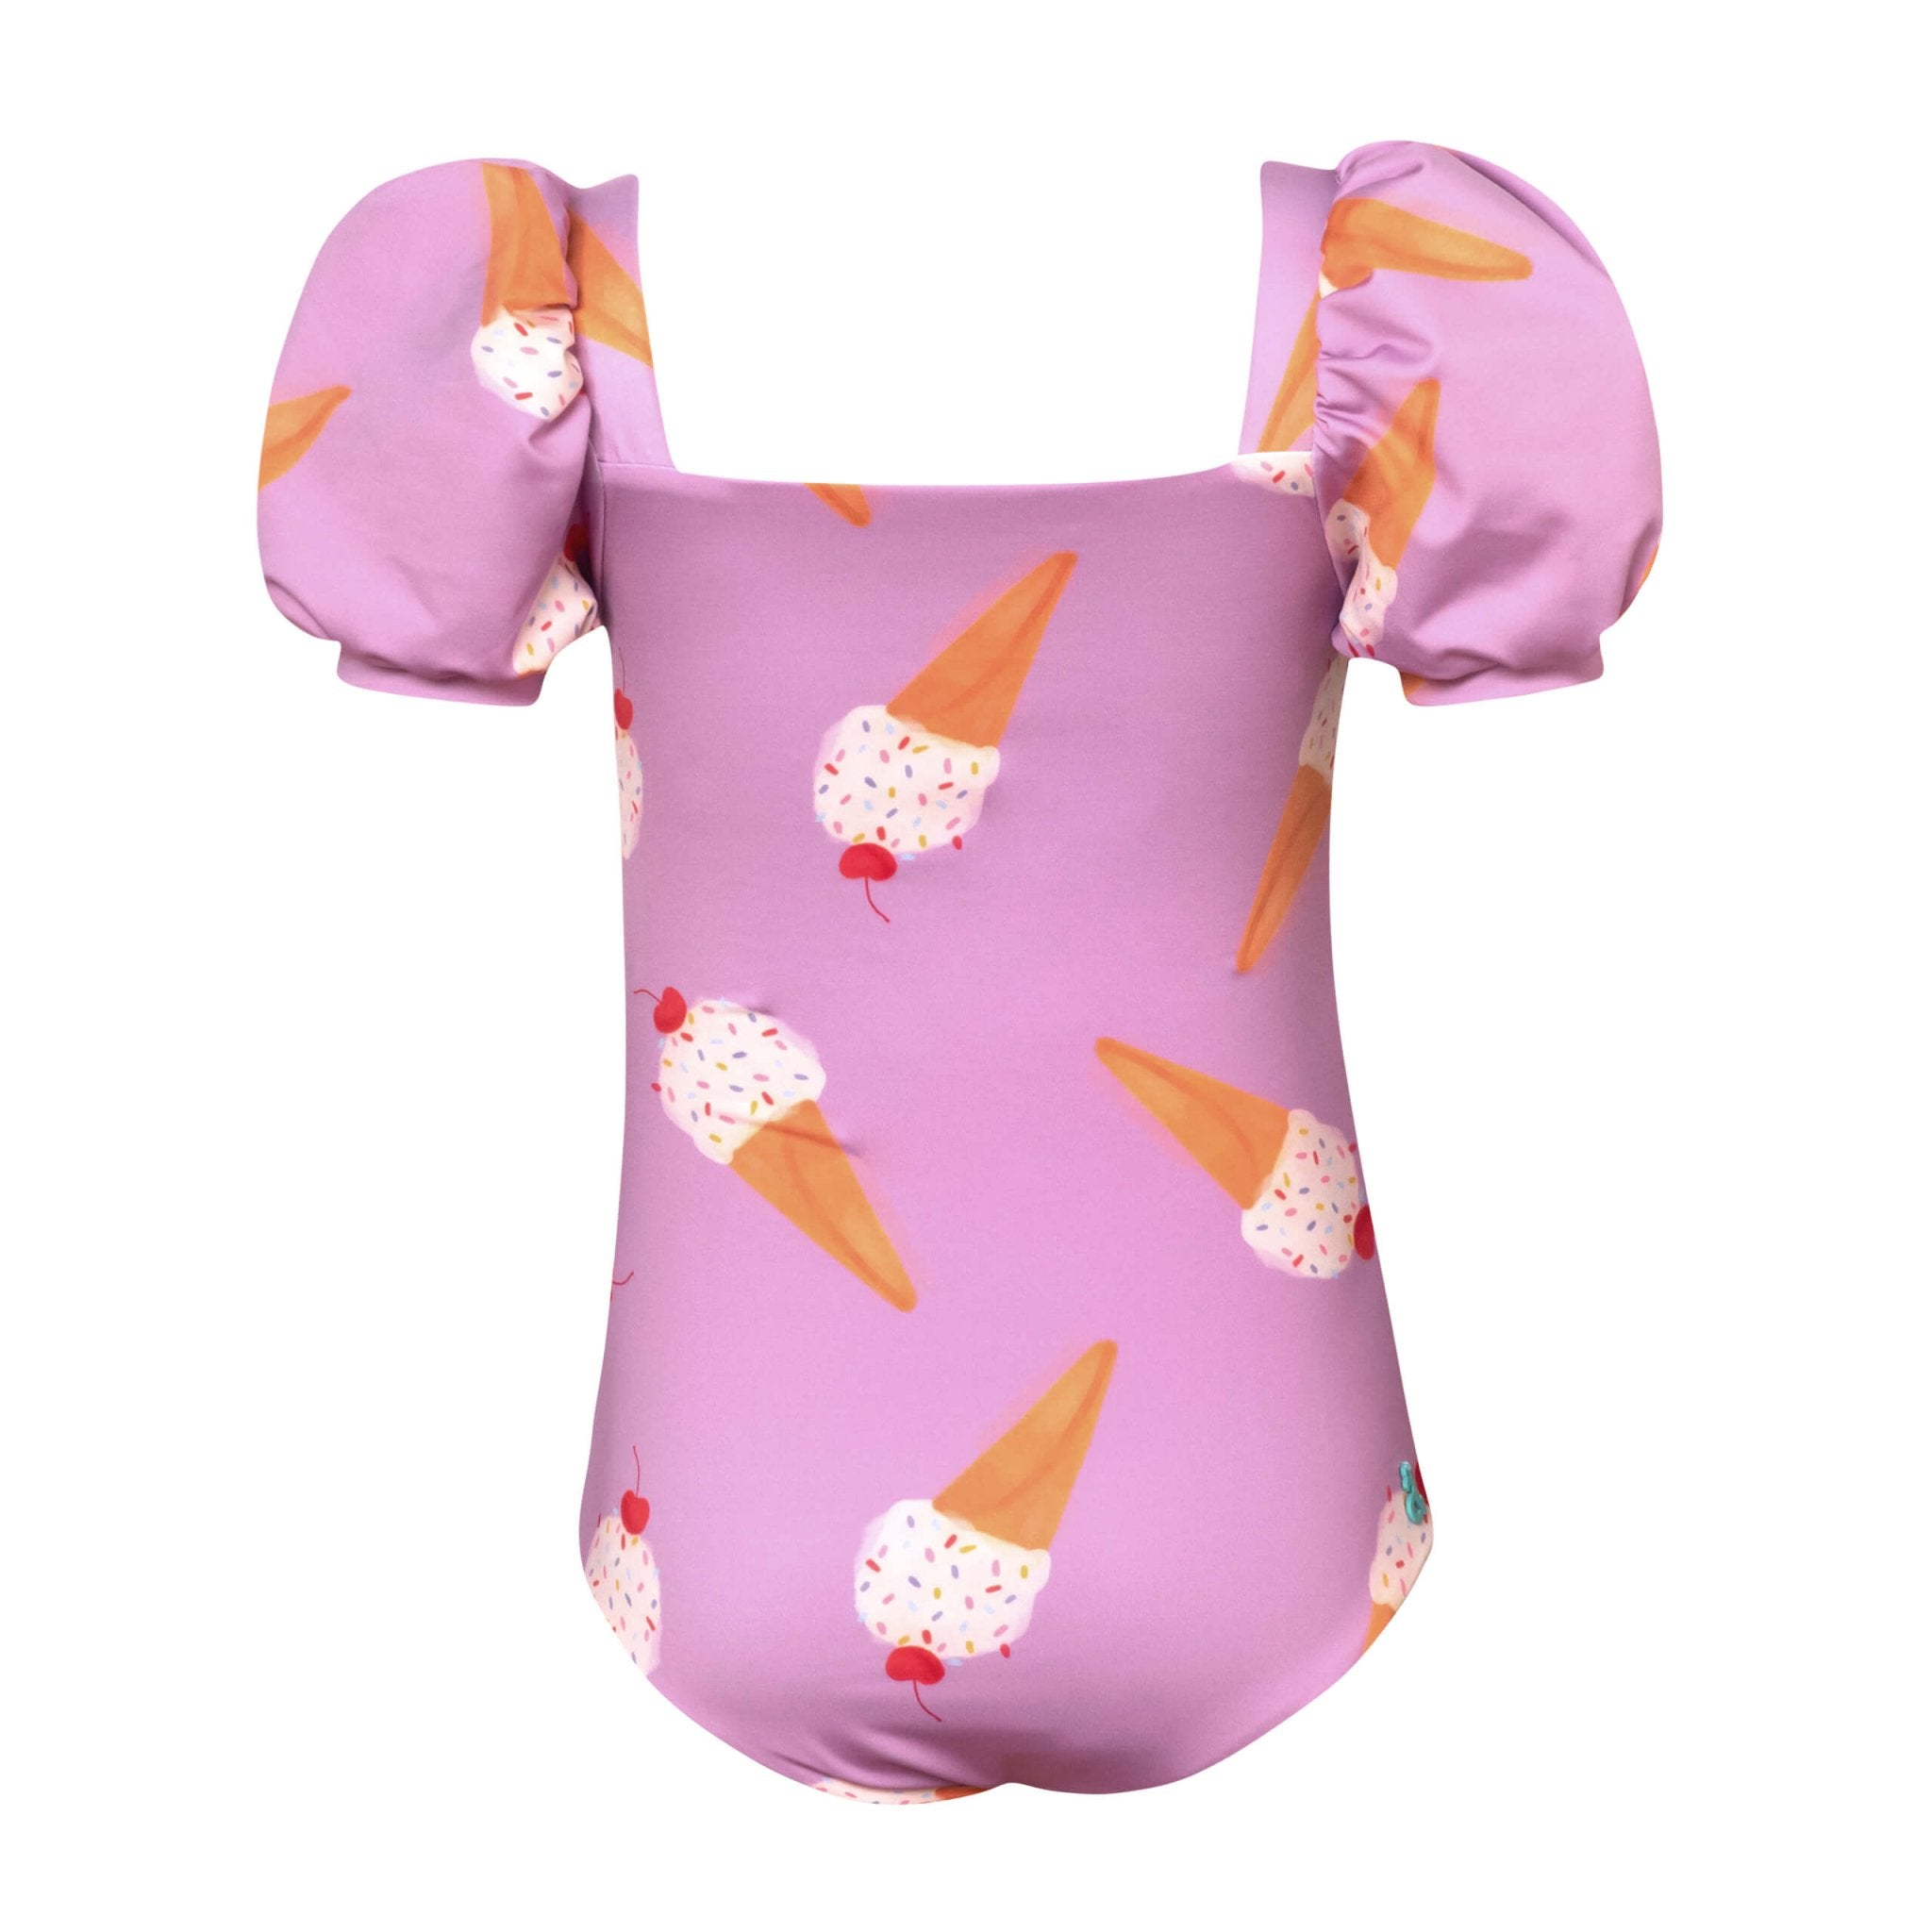 The back of the pink ice cream themed one piece swimsuit for girls. It is shown over a white background. 